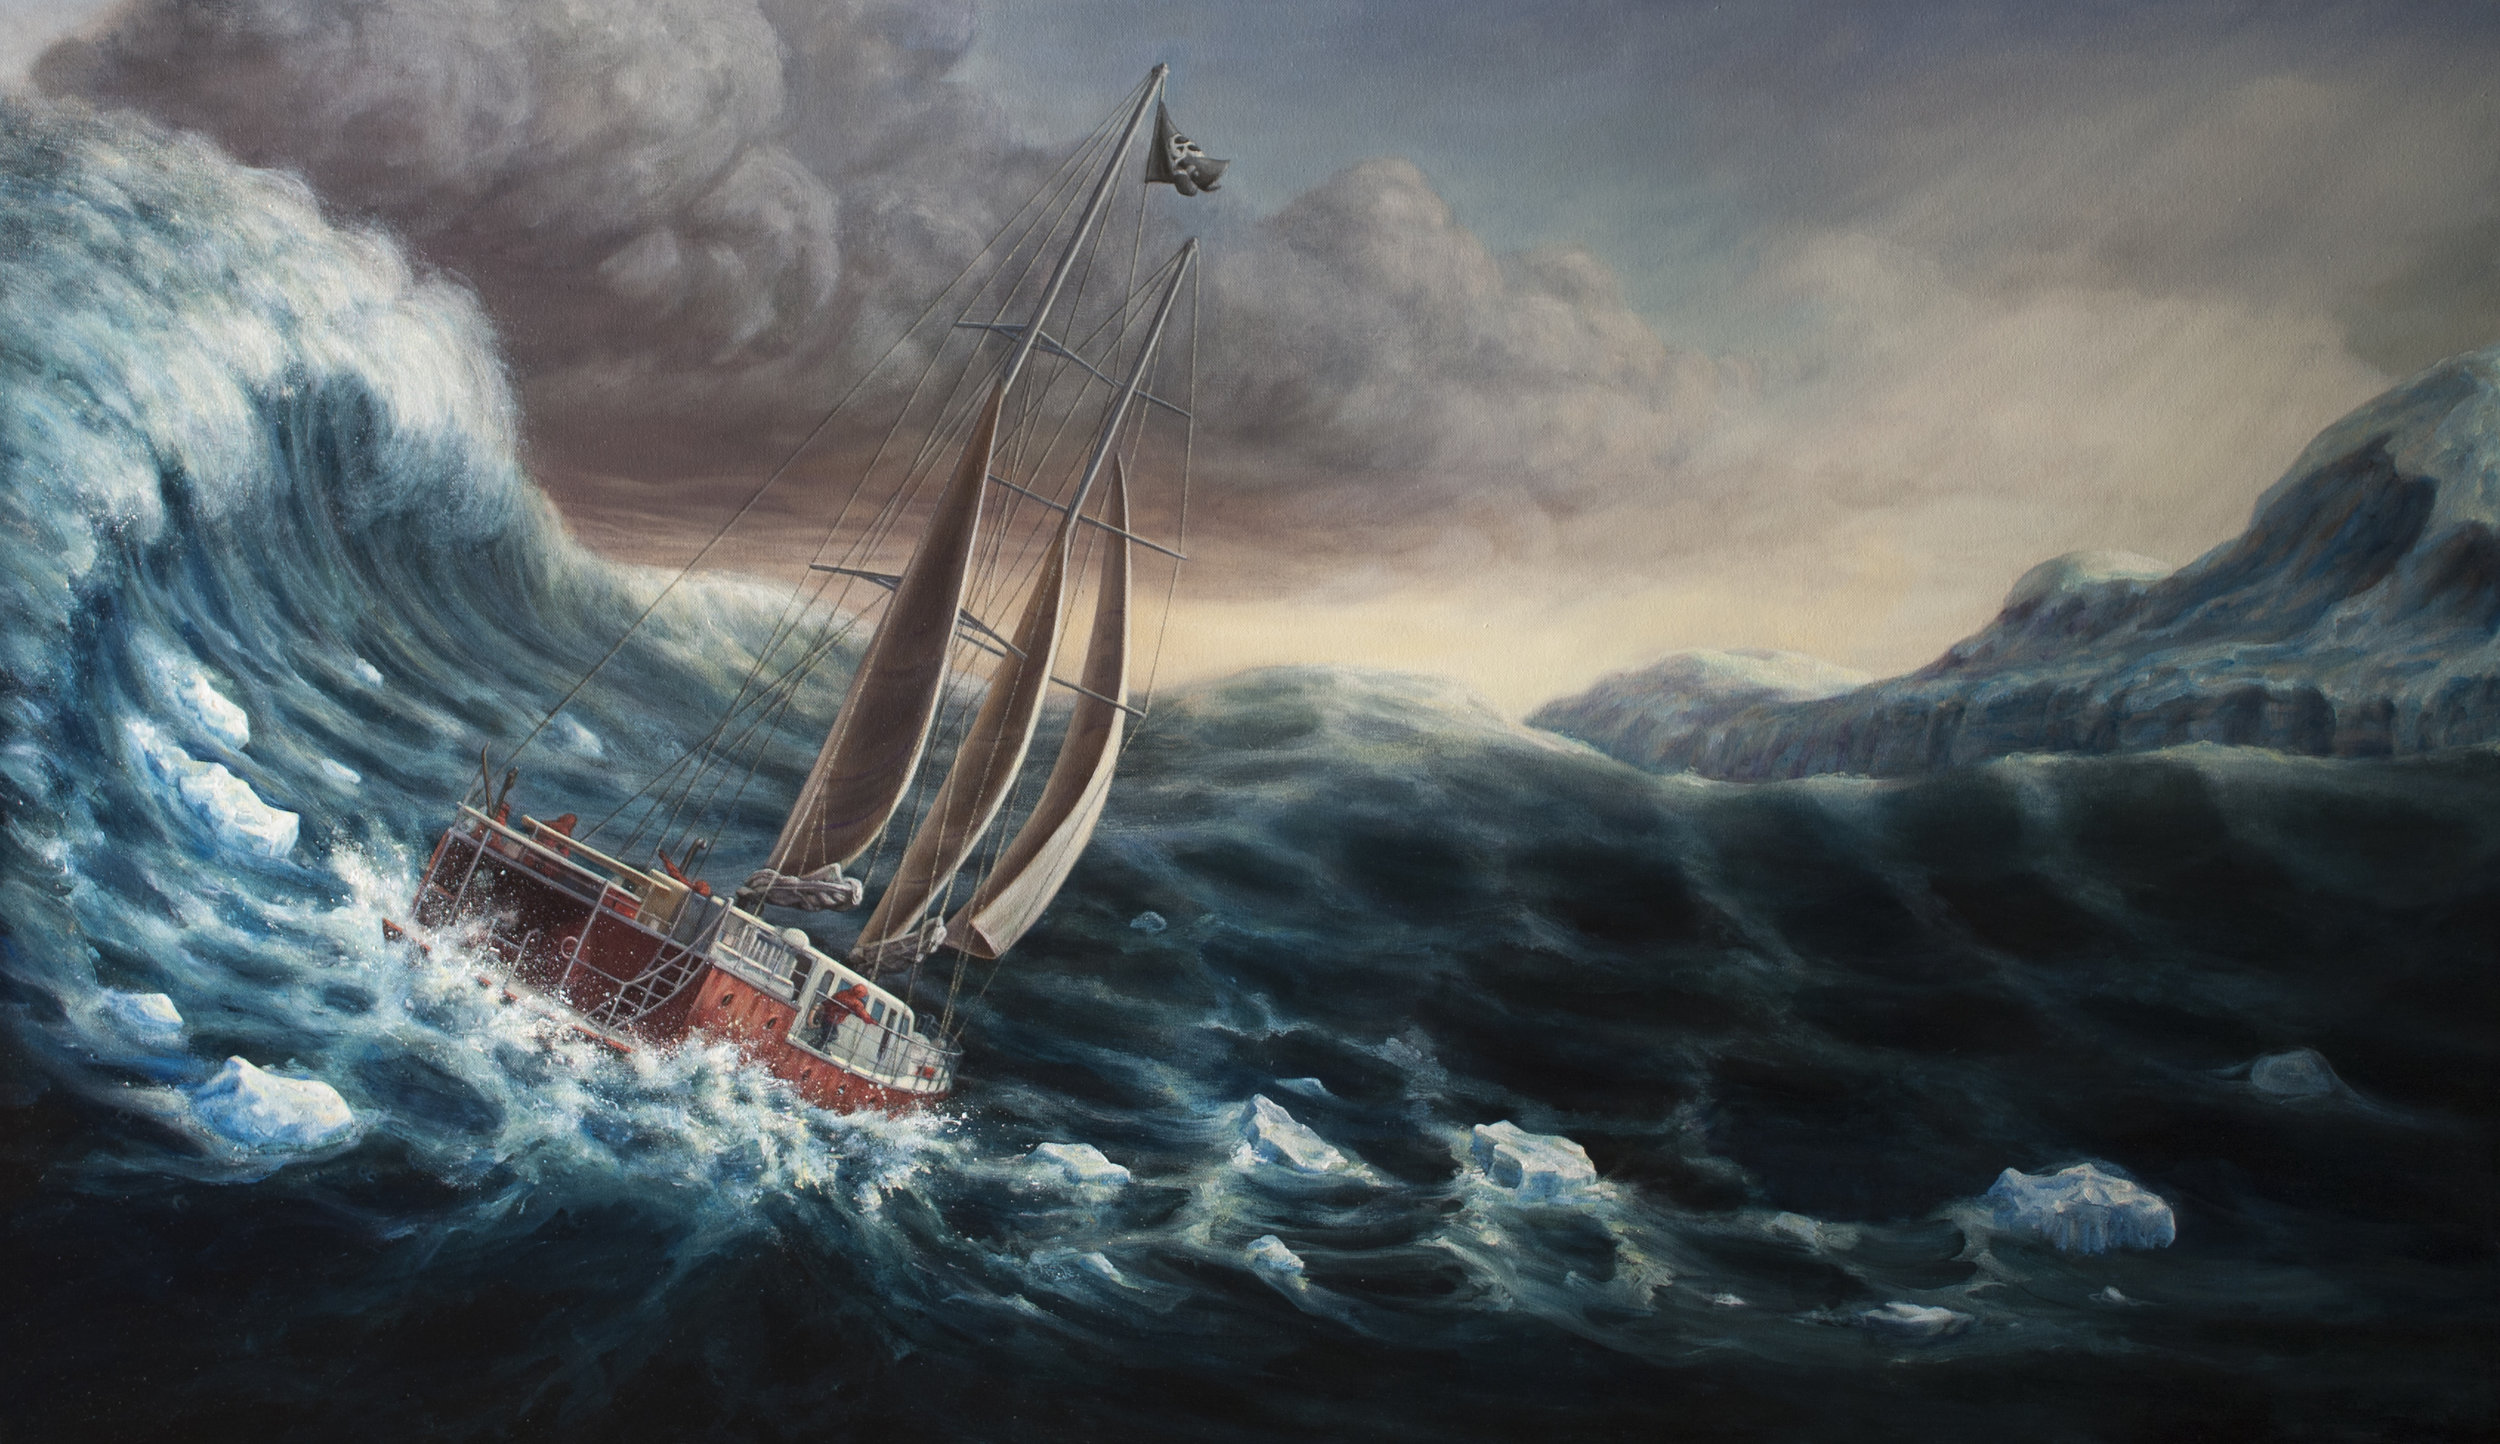  Sea Gypsies (Illustration for film poster)  28" x 48"  Oil on Canvas  2015 